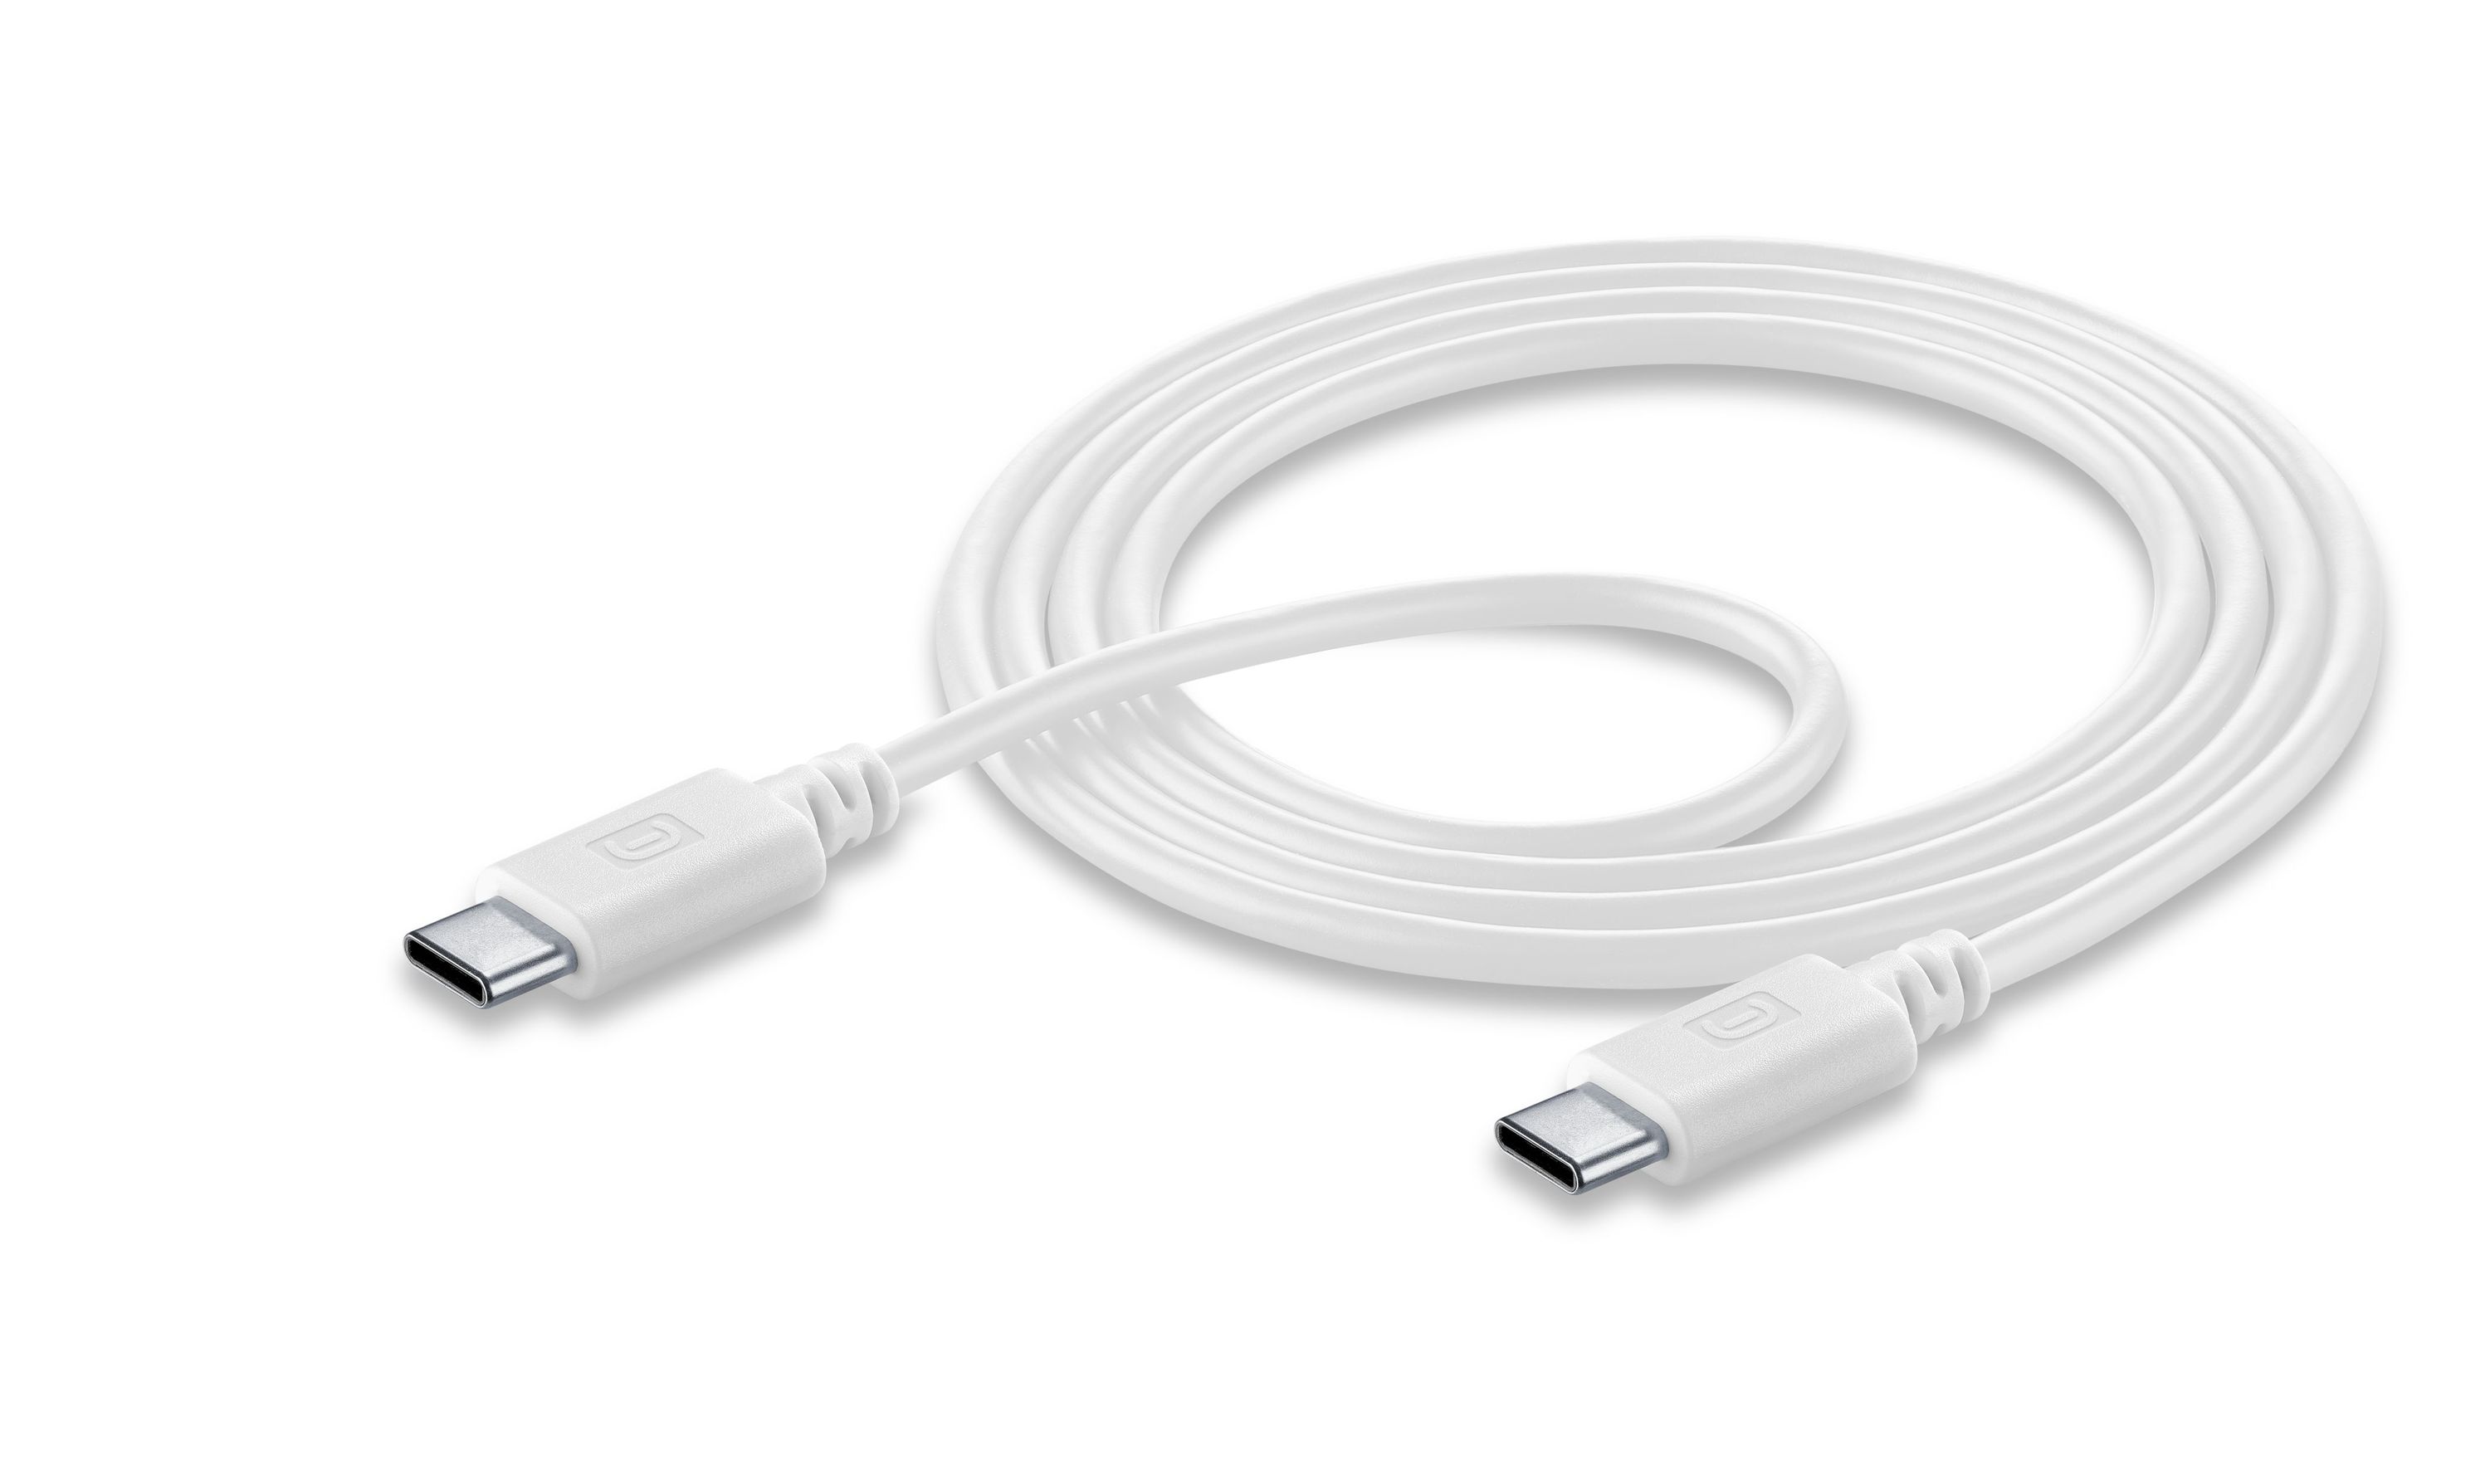 Data cable, usb-c to usb-c 5A super fast charging (120cm), white